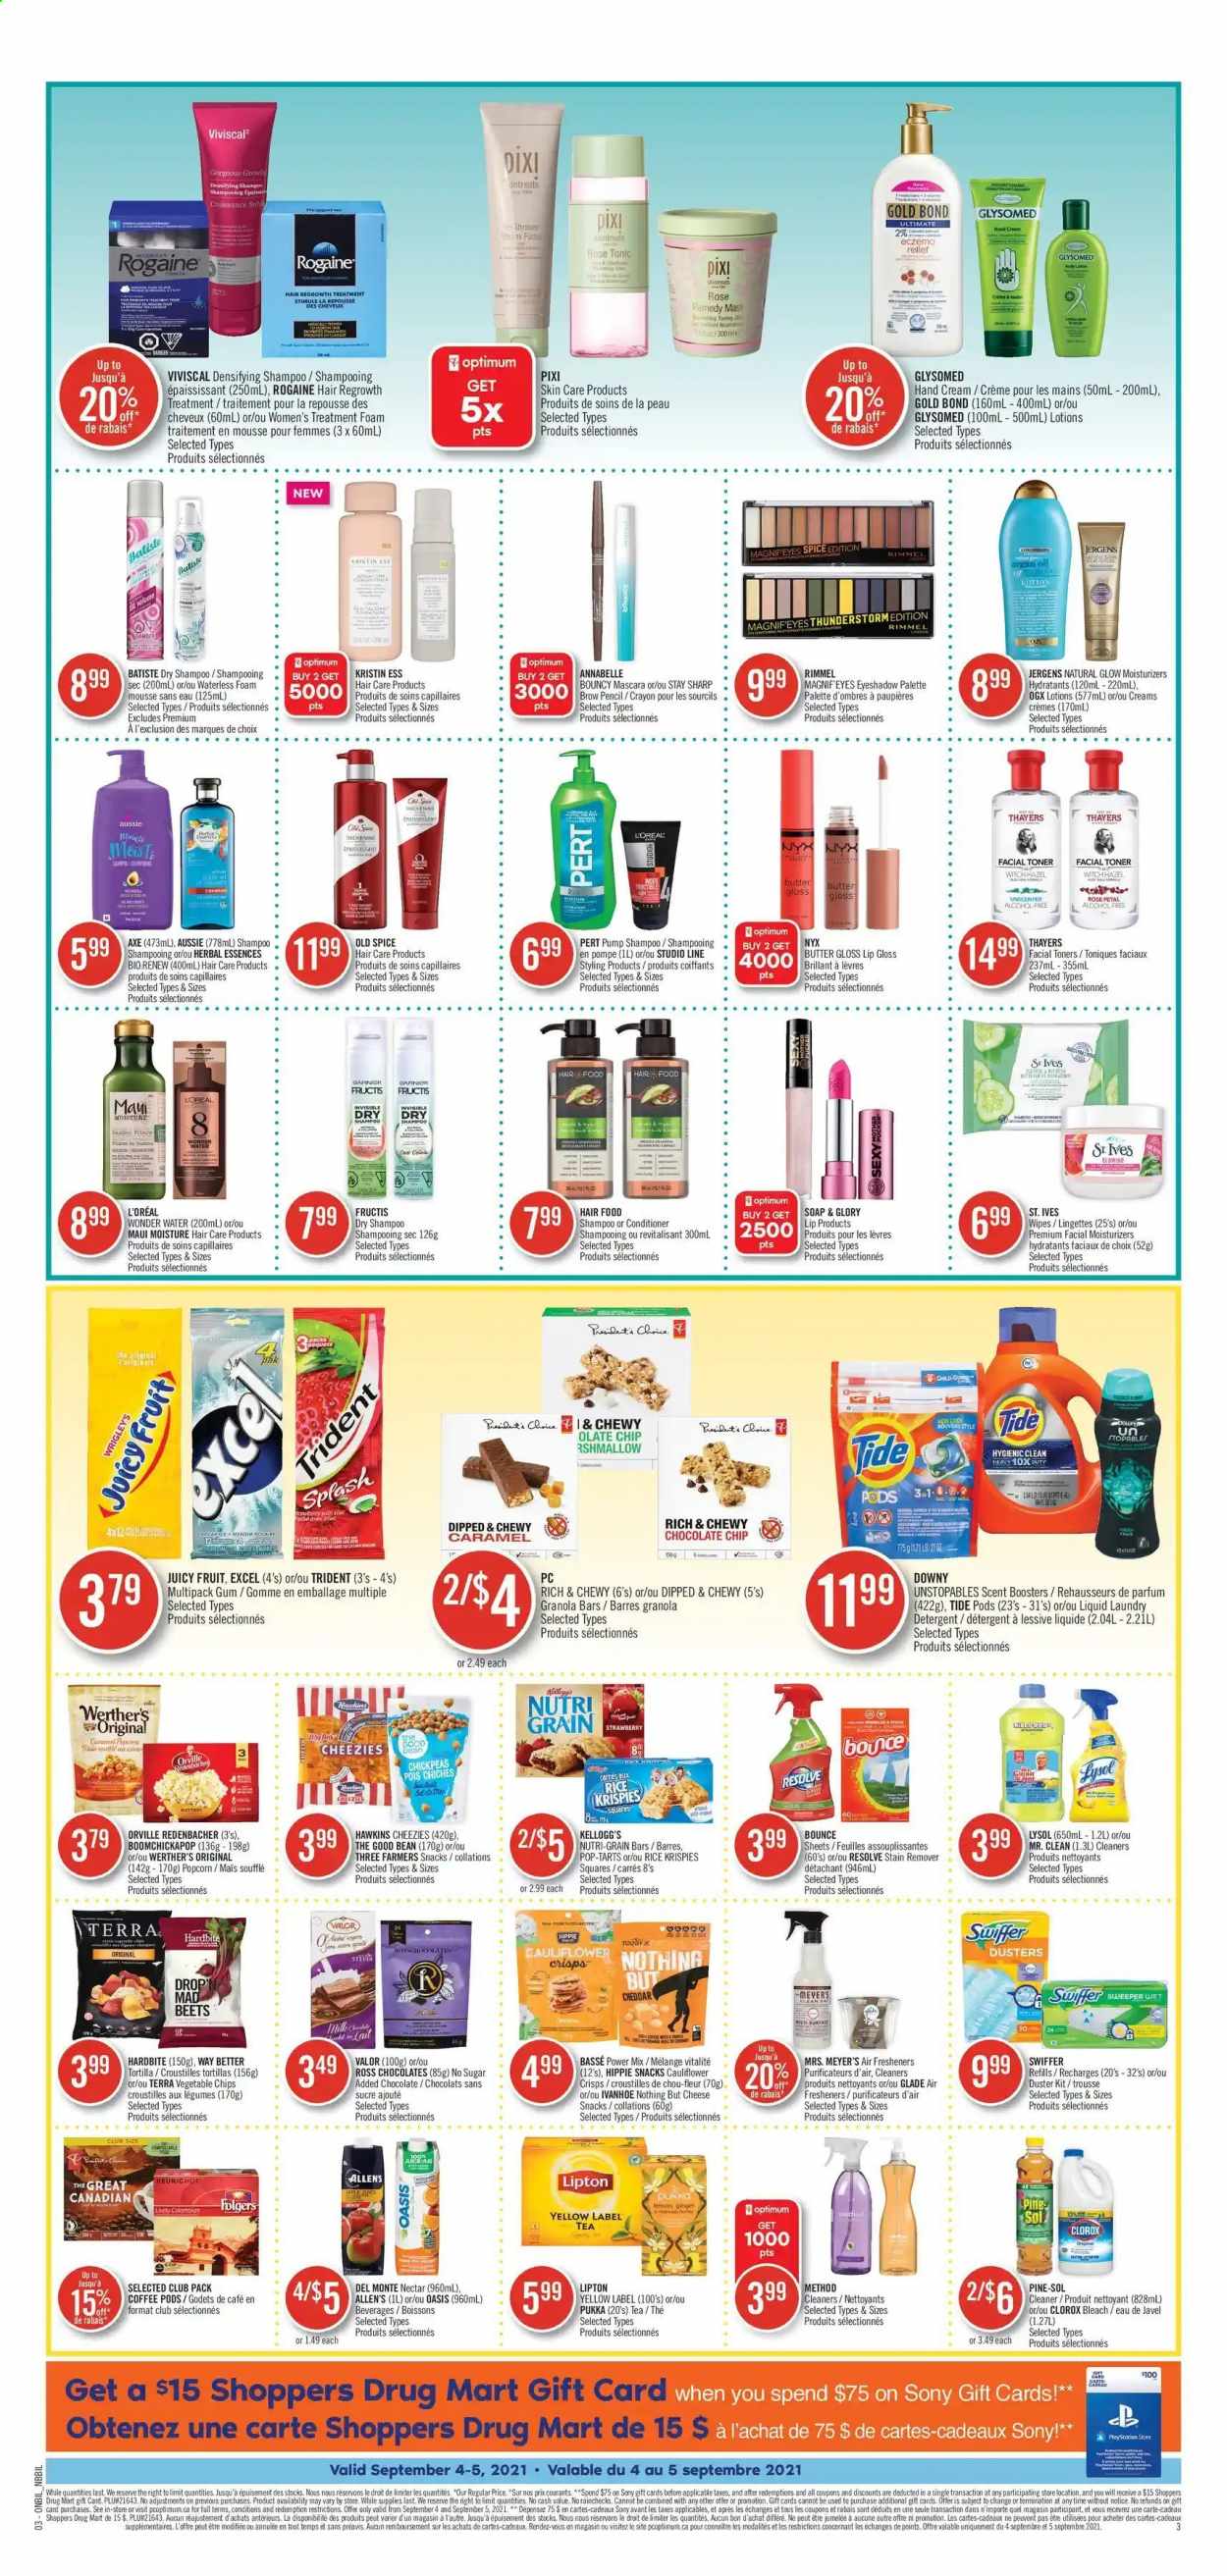 thumbnail - Shoppers Drug Mart Flyer - September 04, 2021 - September 10, 2021 - Sales products - snack, Kellogg's, Trident, Pop-Tarts, tortillas, popcorn, vegetable chips, stevia, granola bar, Rice Krispies, Nutri-Grain, ginger, spice, caramel, honey, tonic, tea, coffee pods, Folgers, wipes, cleaner, bleach, stain remover, Lysol, Clorox, Pine-Sol, Swiffer, Tide, Unstopables, laundry detergent, Bounce, scent booster, soap, L’Oréal, moisturizer, NYX Cosmetics, OGX, Aussie, conditioner, Herbal Essences, Maui Moisture, Fructis, hand cream, Jergens, eyeshadow, lip gloss, Rimmel, detergent, Garnier, mascara, shampoo, Palette, Old Spice, chips, Lipton. Page 3.